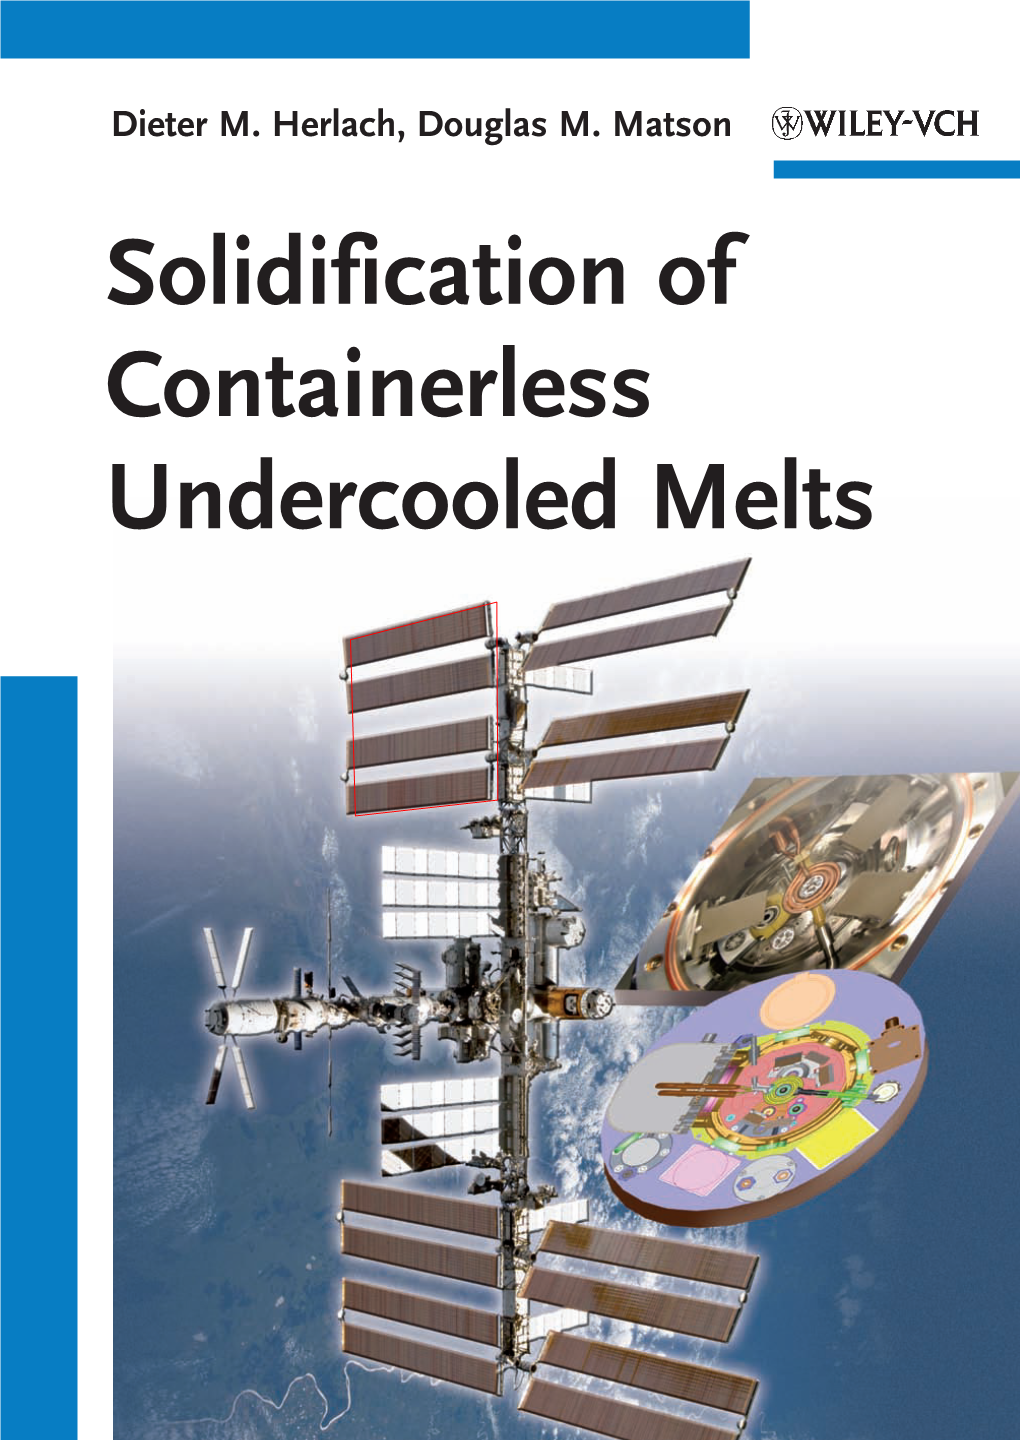 Solidification of Containerless Undercooled Melts Wiley-VCH the Editors All Books Published by Are Carefully Produced